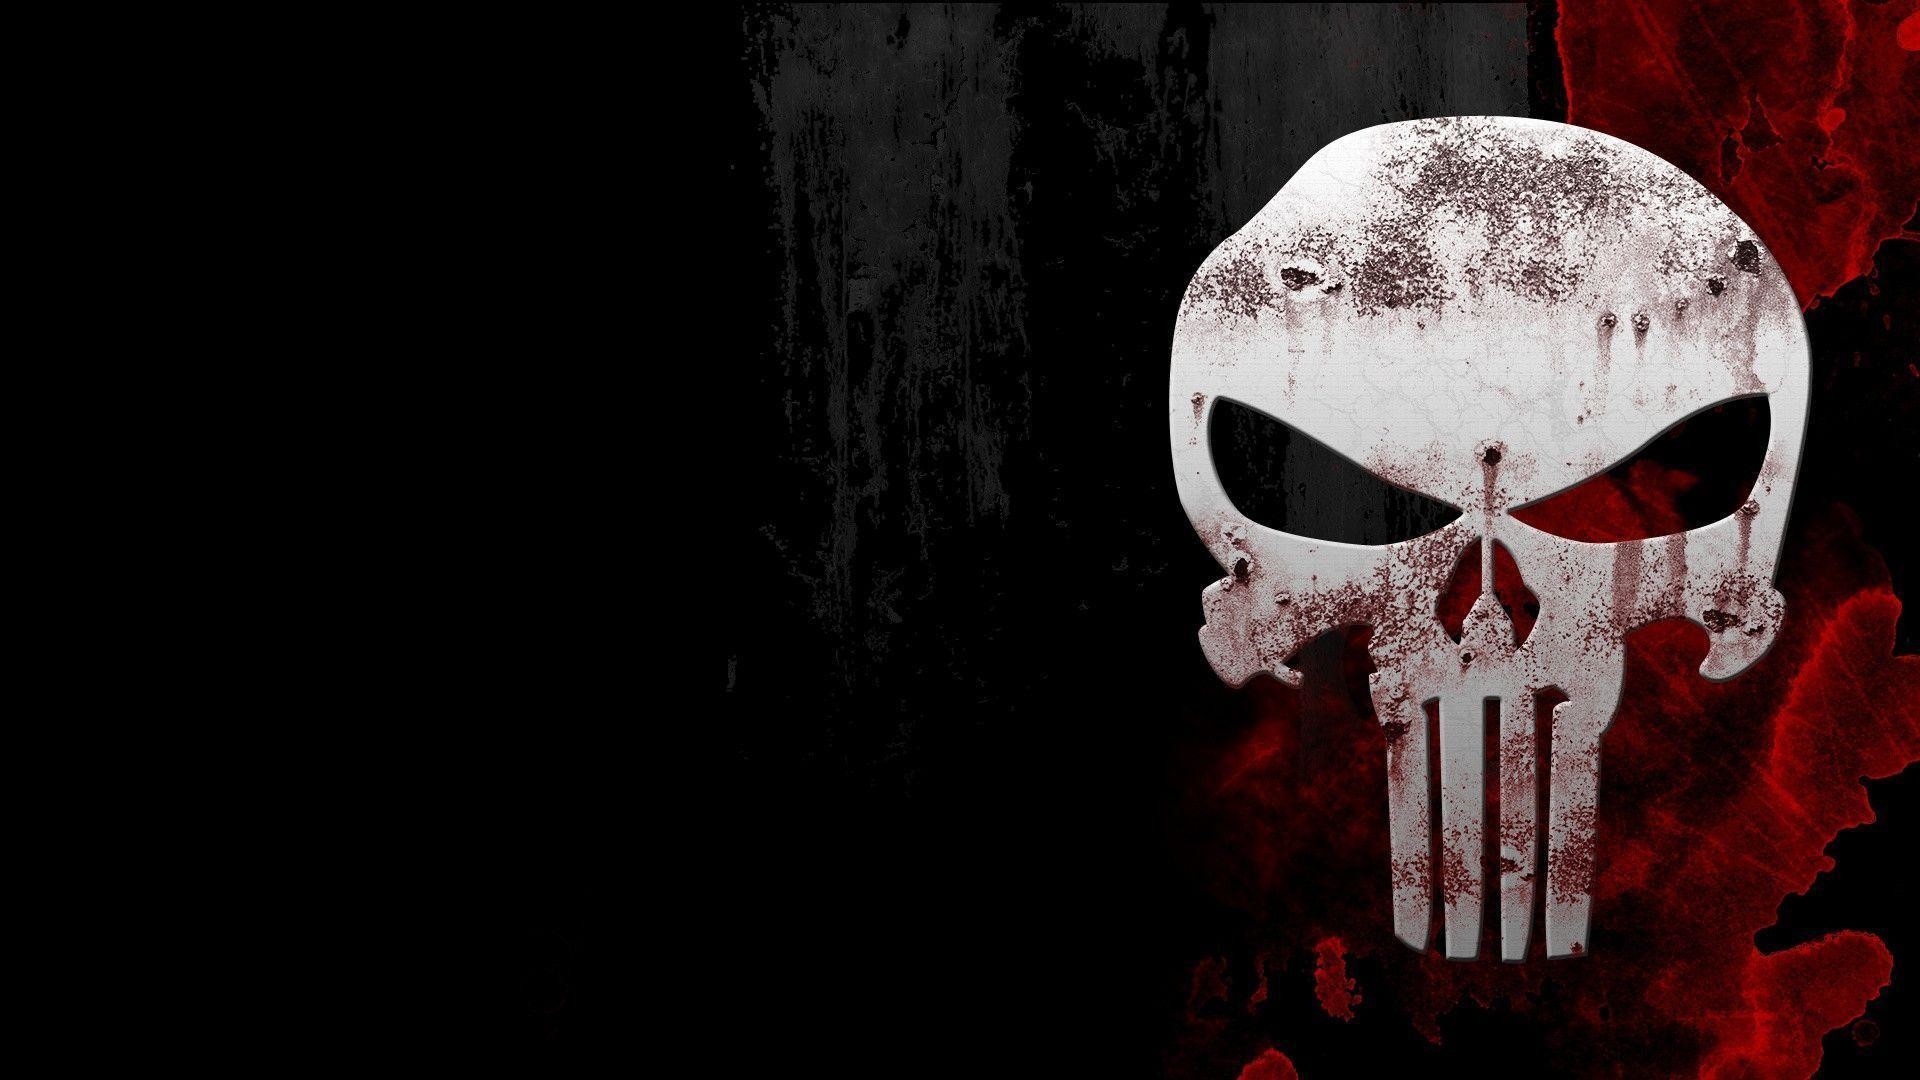 1920x1080 Scary Skull Wallpapers HD Download Scary Skull Wallpapers HD . 1920Ã1080